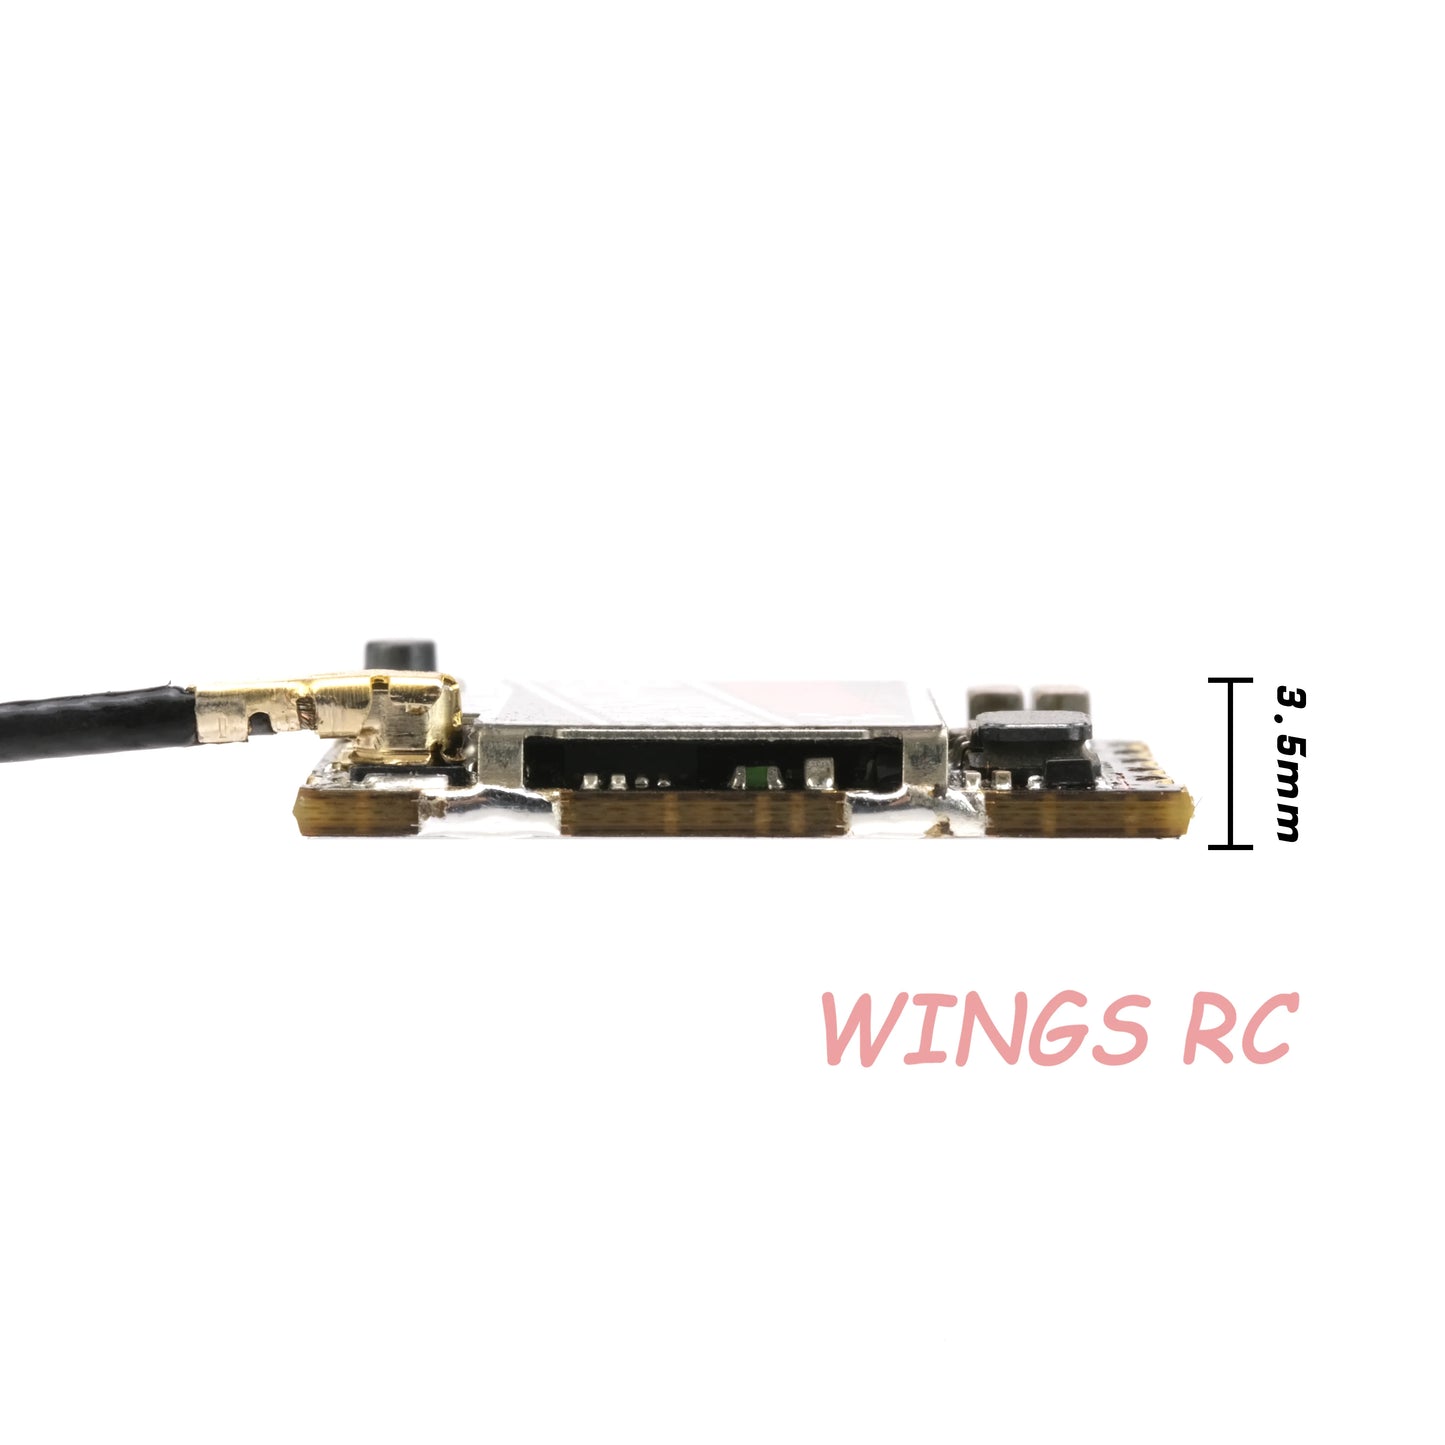 RUSH TANK RACE II VTX - 48CH PIT/25/50/200mW/MAX 5.8GHz Video Transmitter w/ Smart Audio 20x15mm 1.7g Stackable For FPV Racing Drone Micro Stacks